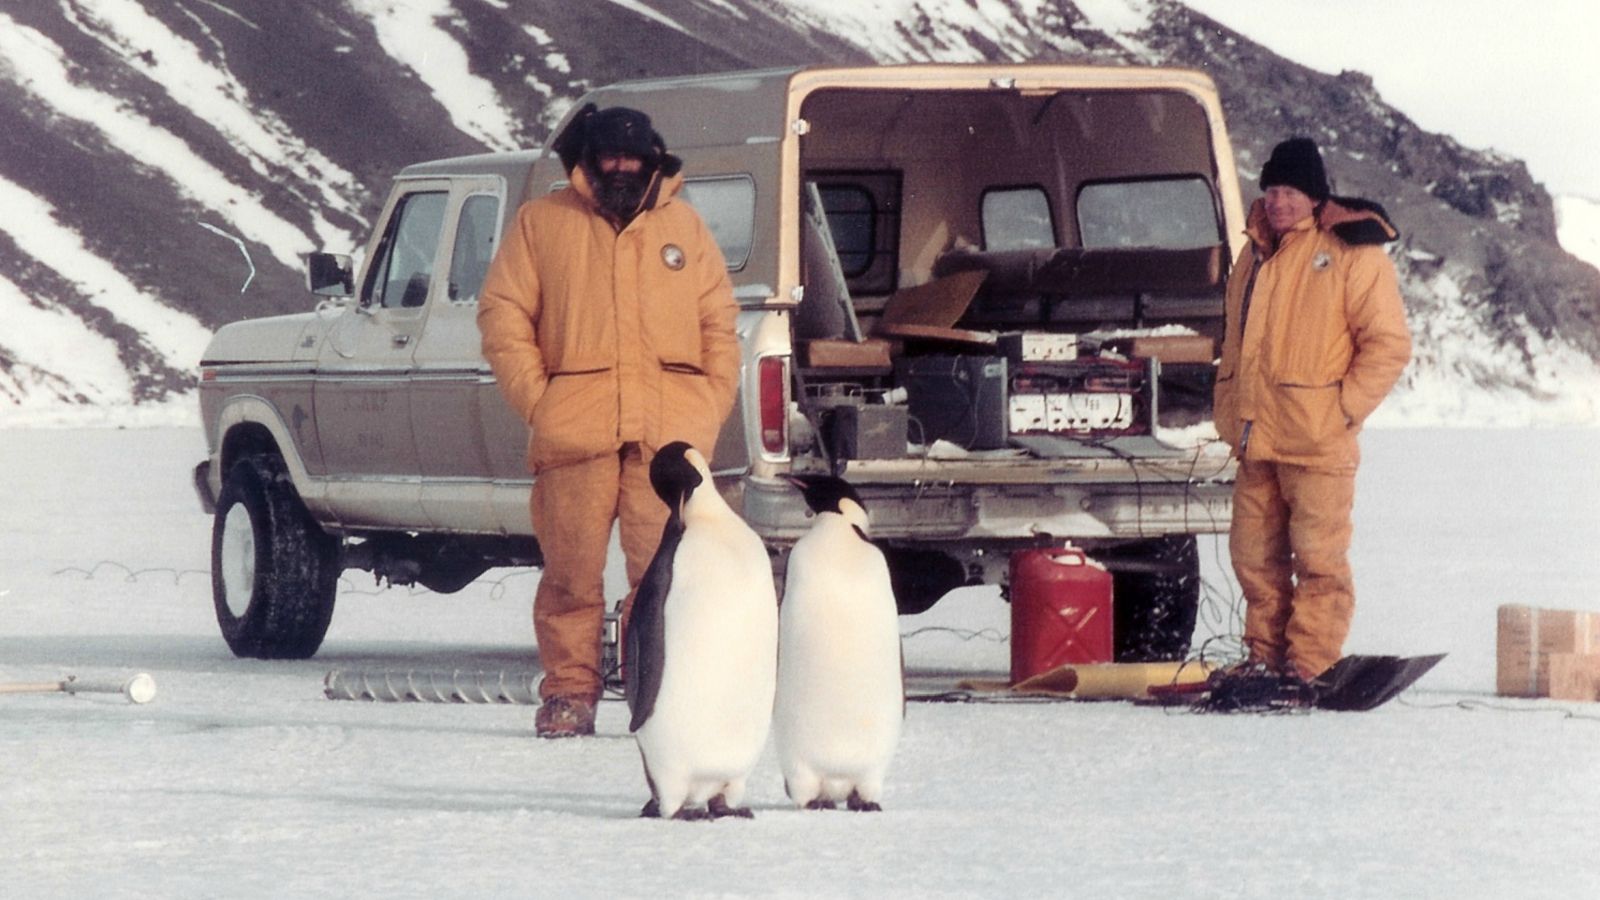 Two men in jumpsuits in Antarctica with penguins in foreground.